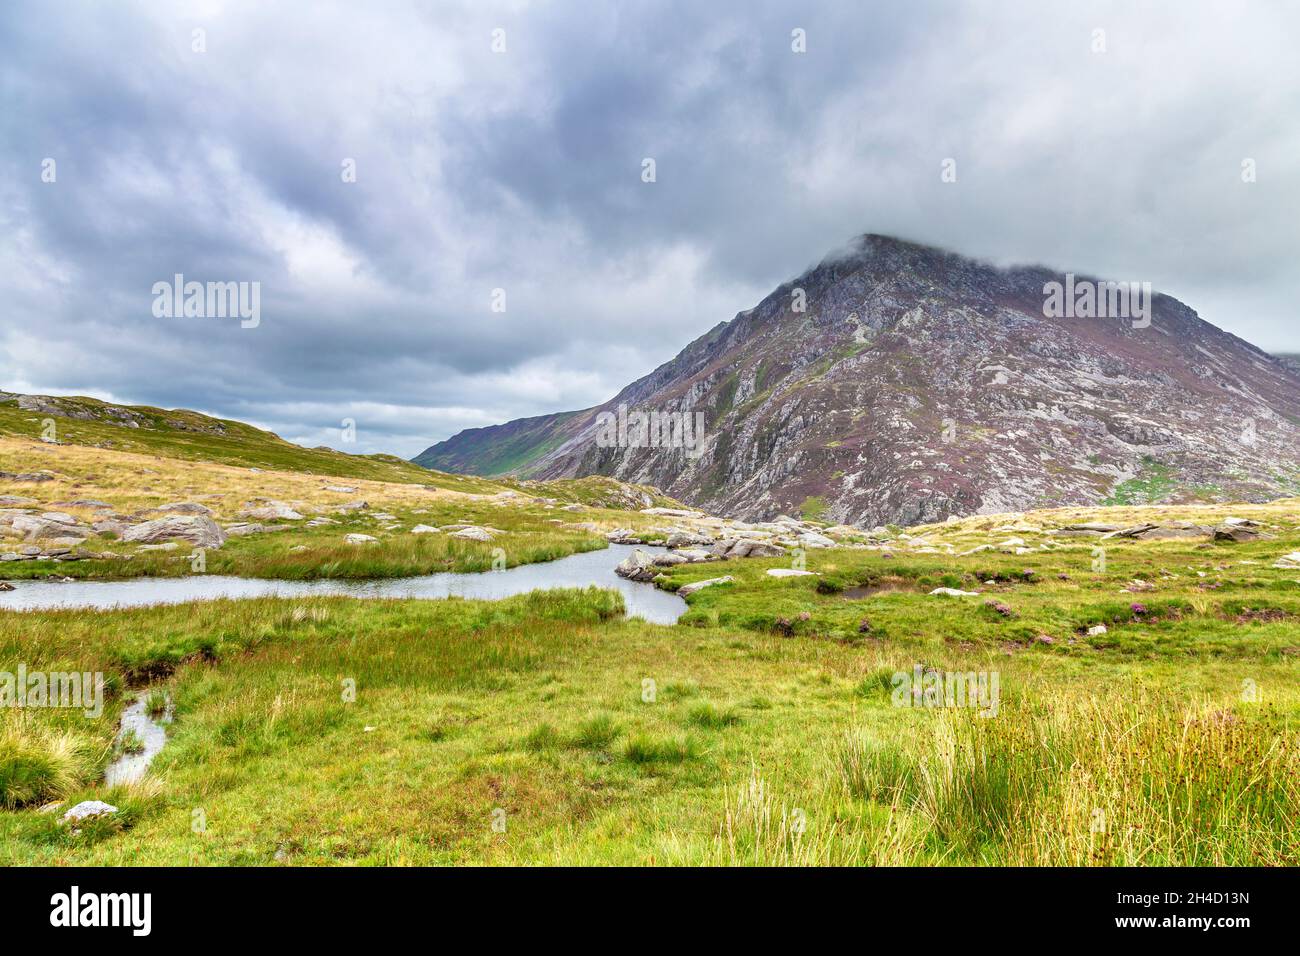 Pen Yr Ole Wen mountain and a mountain stream as seen from Cwm Idwal Nature Reserve, Snowdonia, Wales, UK Stock Photo